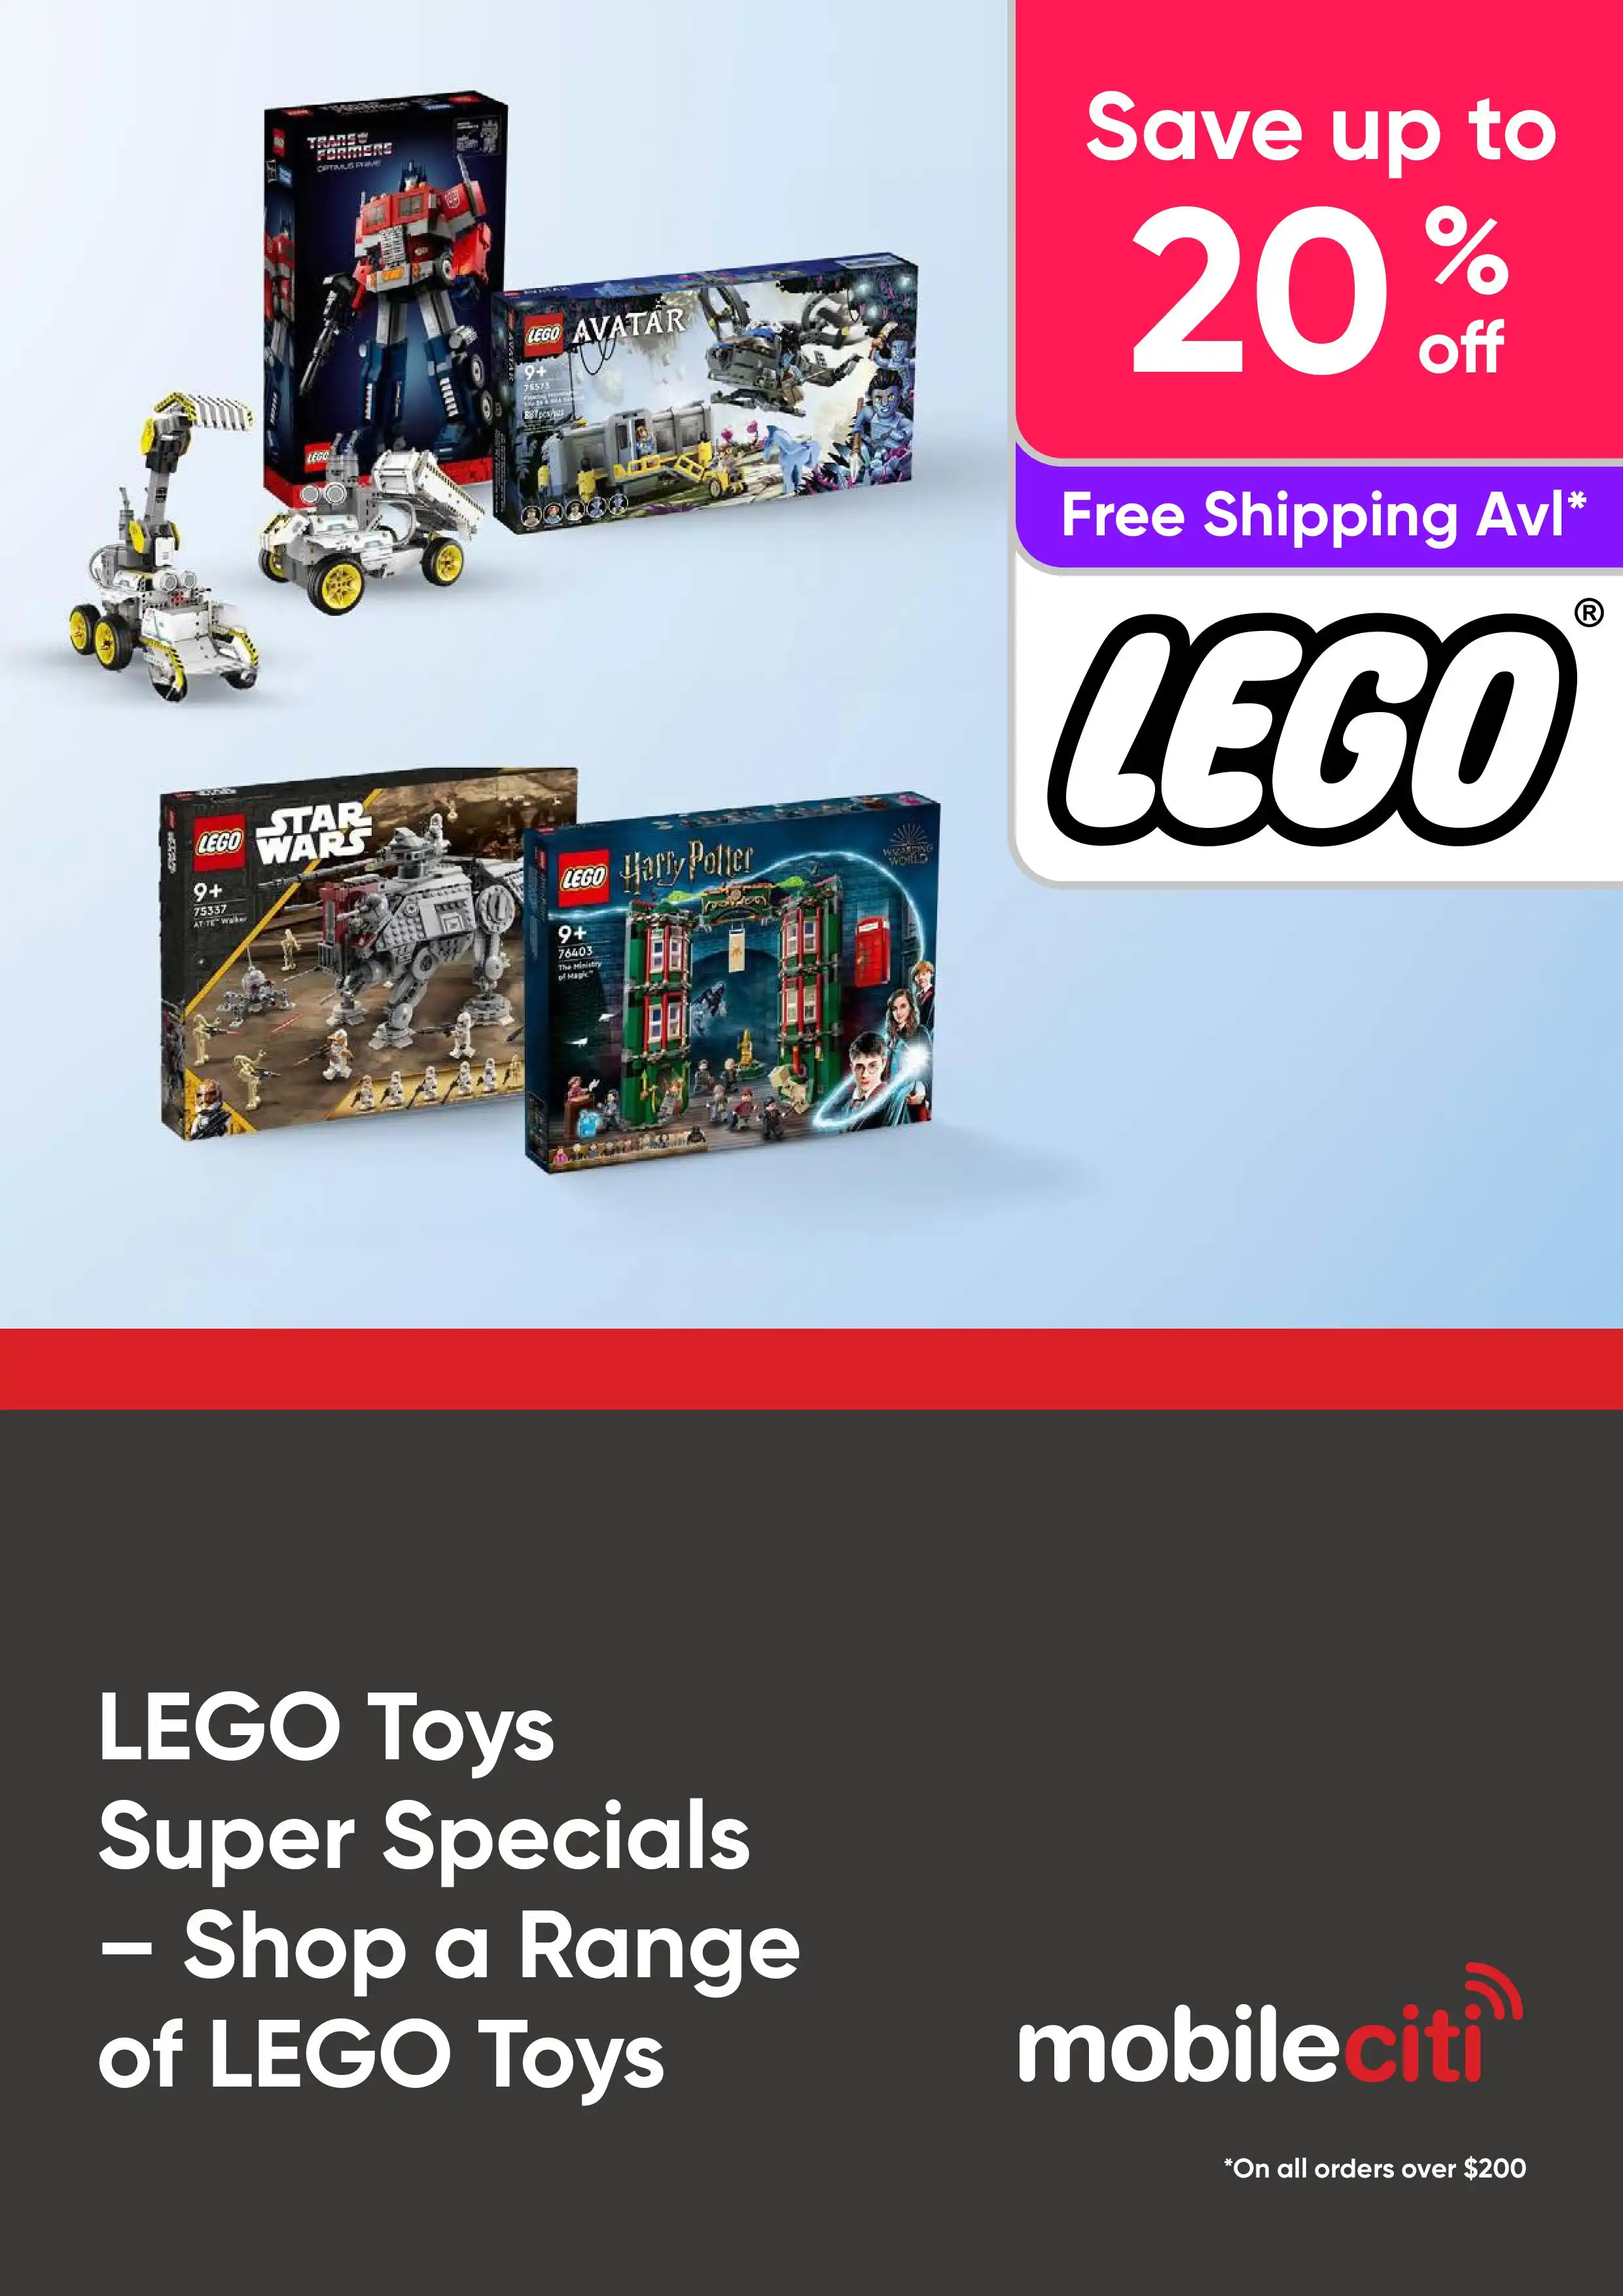 LEGO Toys Super Specials - Save Up to 20% off a Range of LEGO Toys